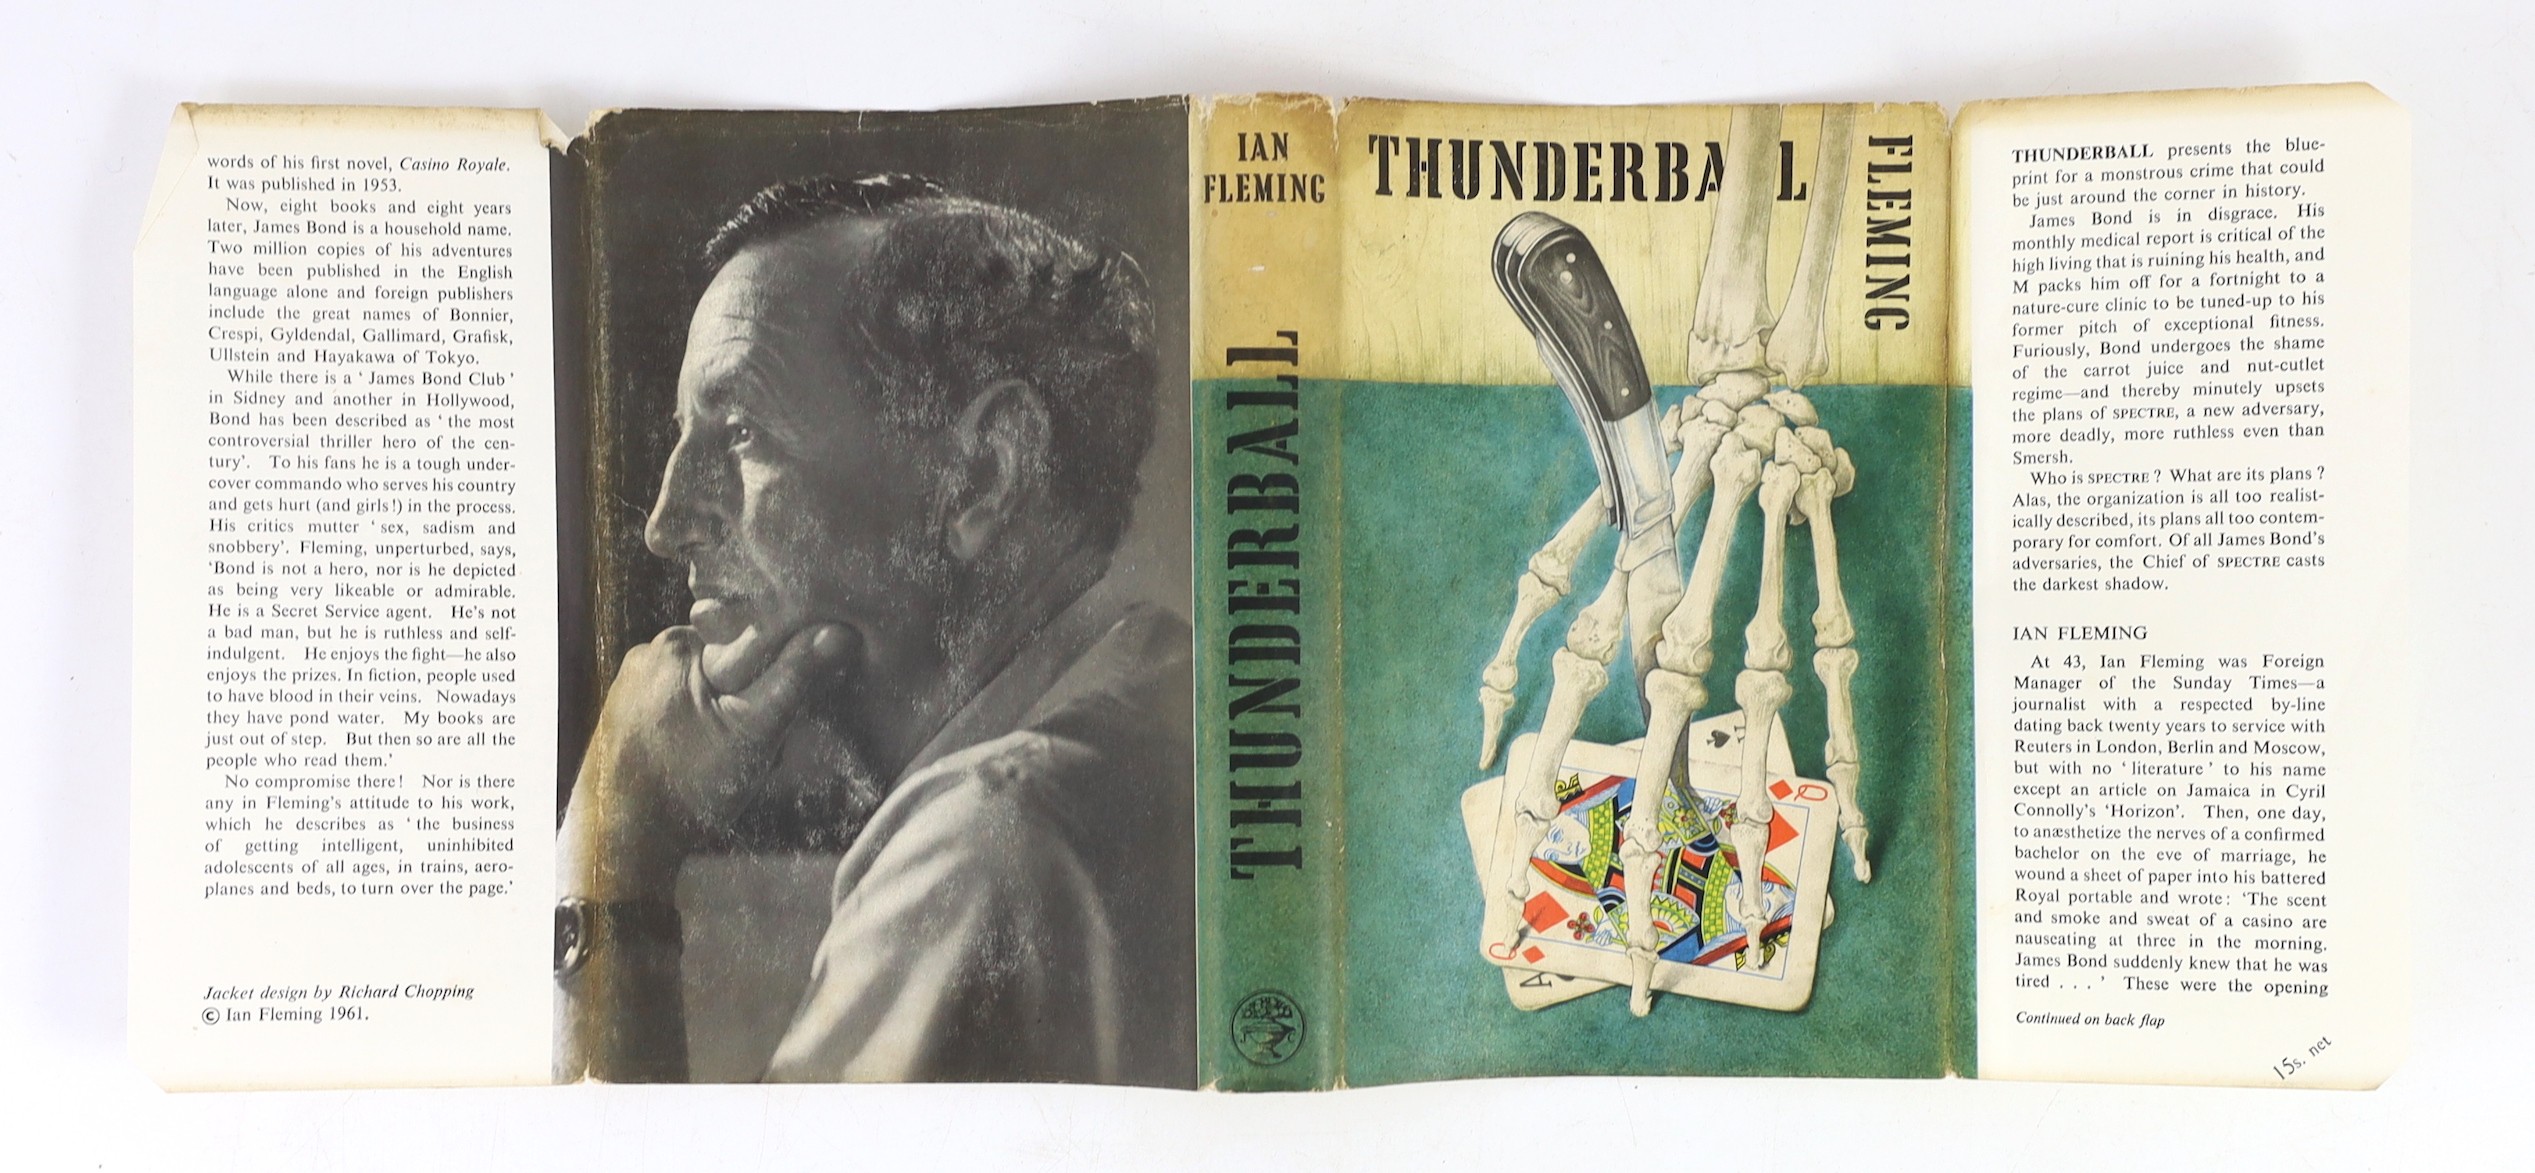 Fleming, Ian - Thunderball, 1st edition, 8vo, cloth in unclipped d/j, Jonathan Cape, London, 1961